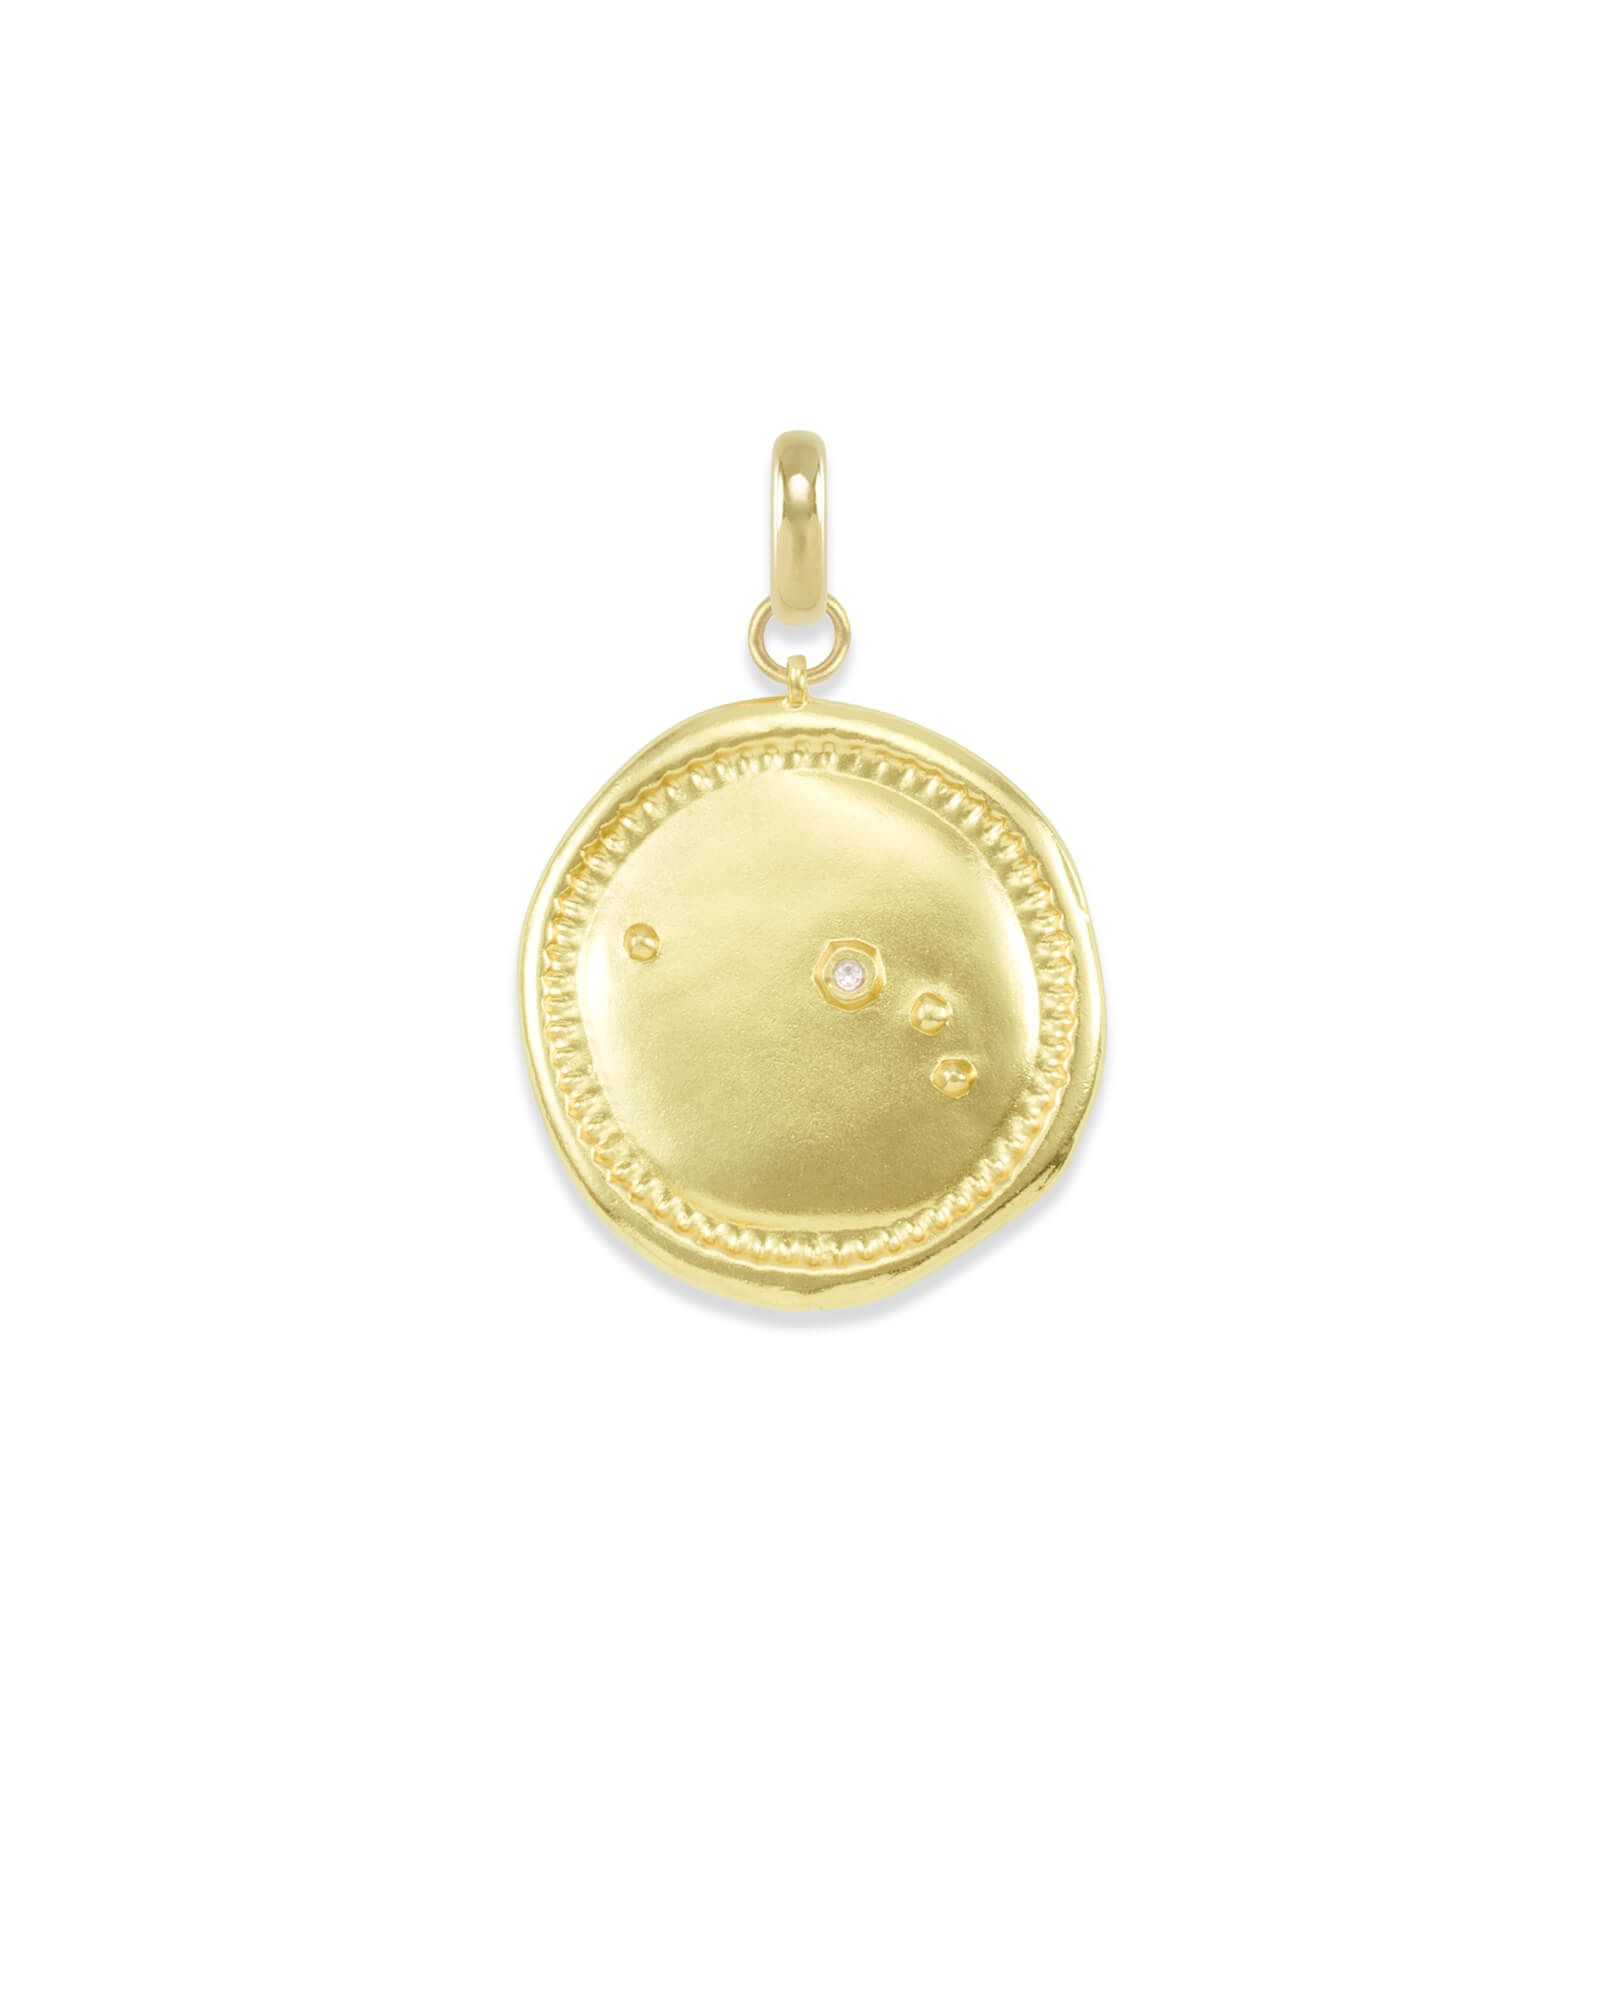 Aries Coin Charm in Gold | Kendra Scott